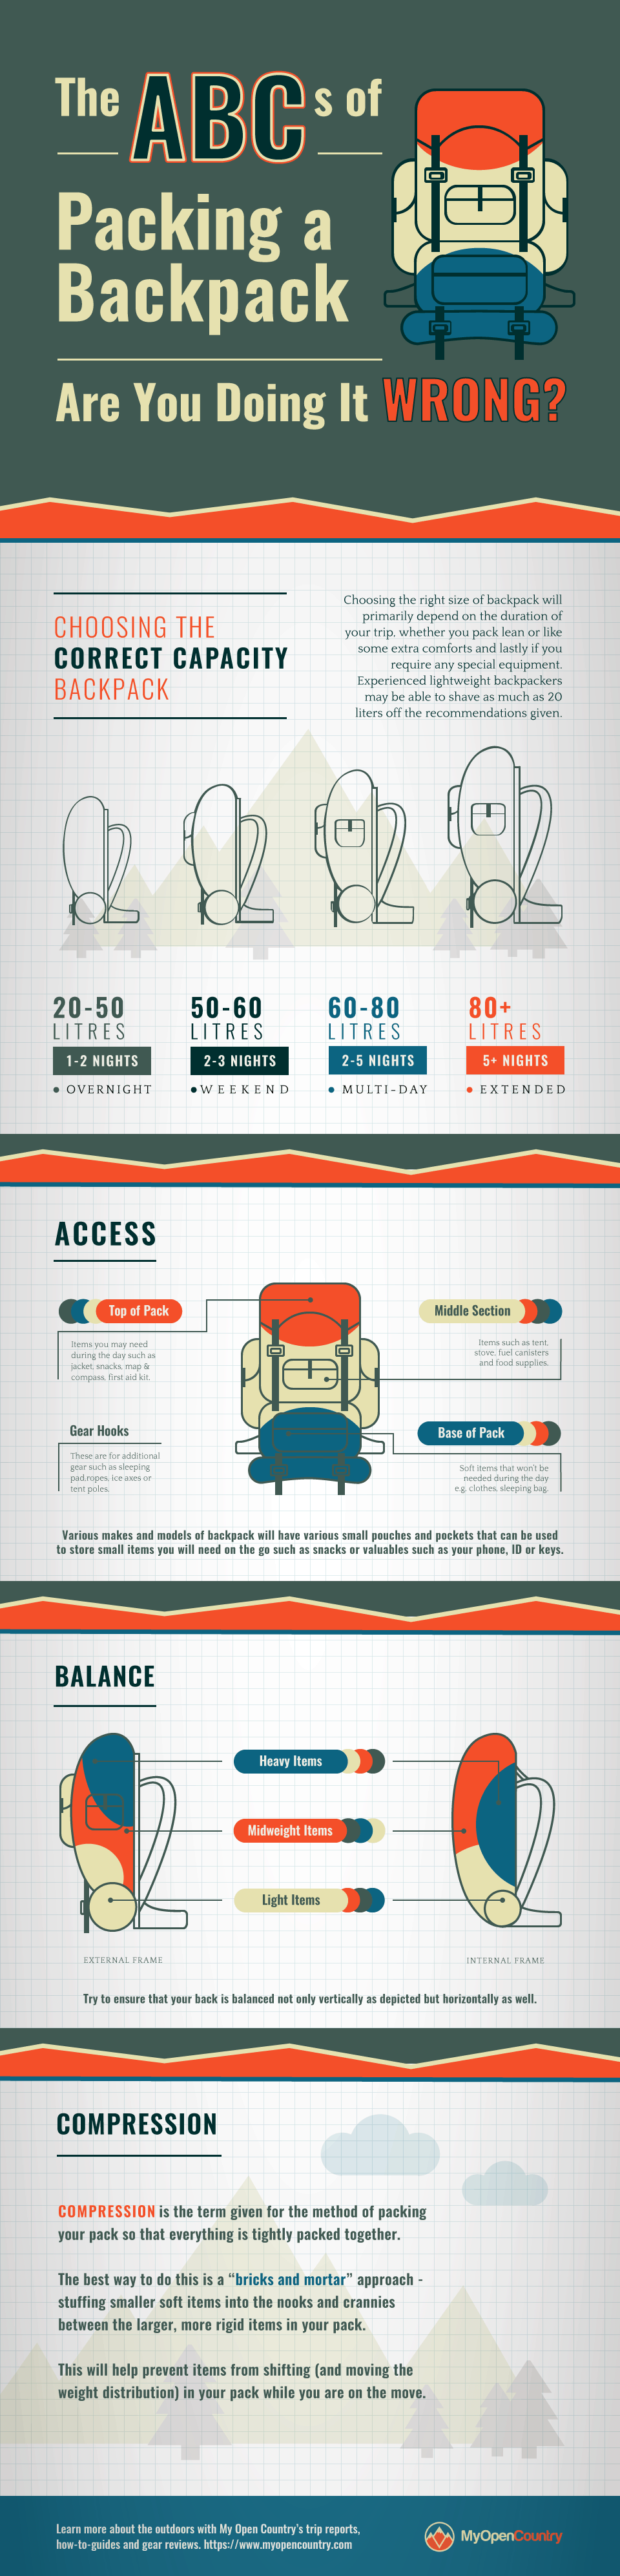 How to Pack a Backpack Infographic